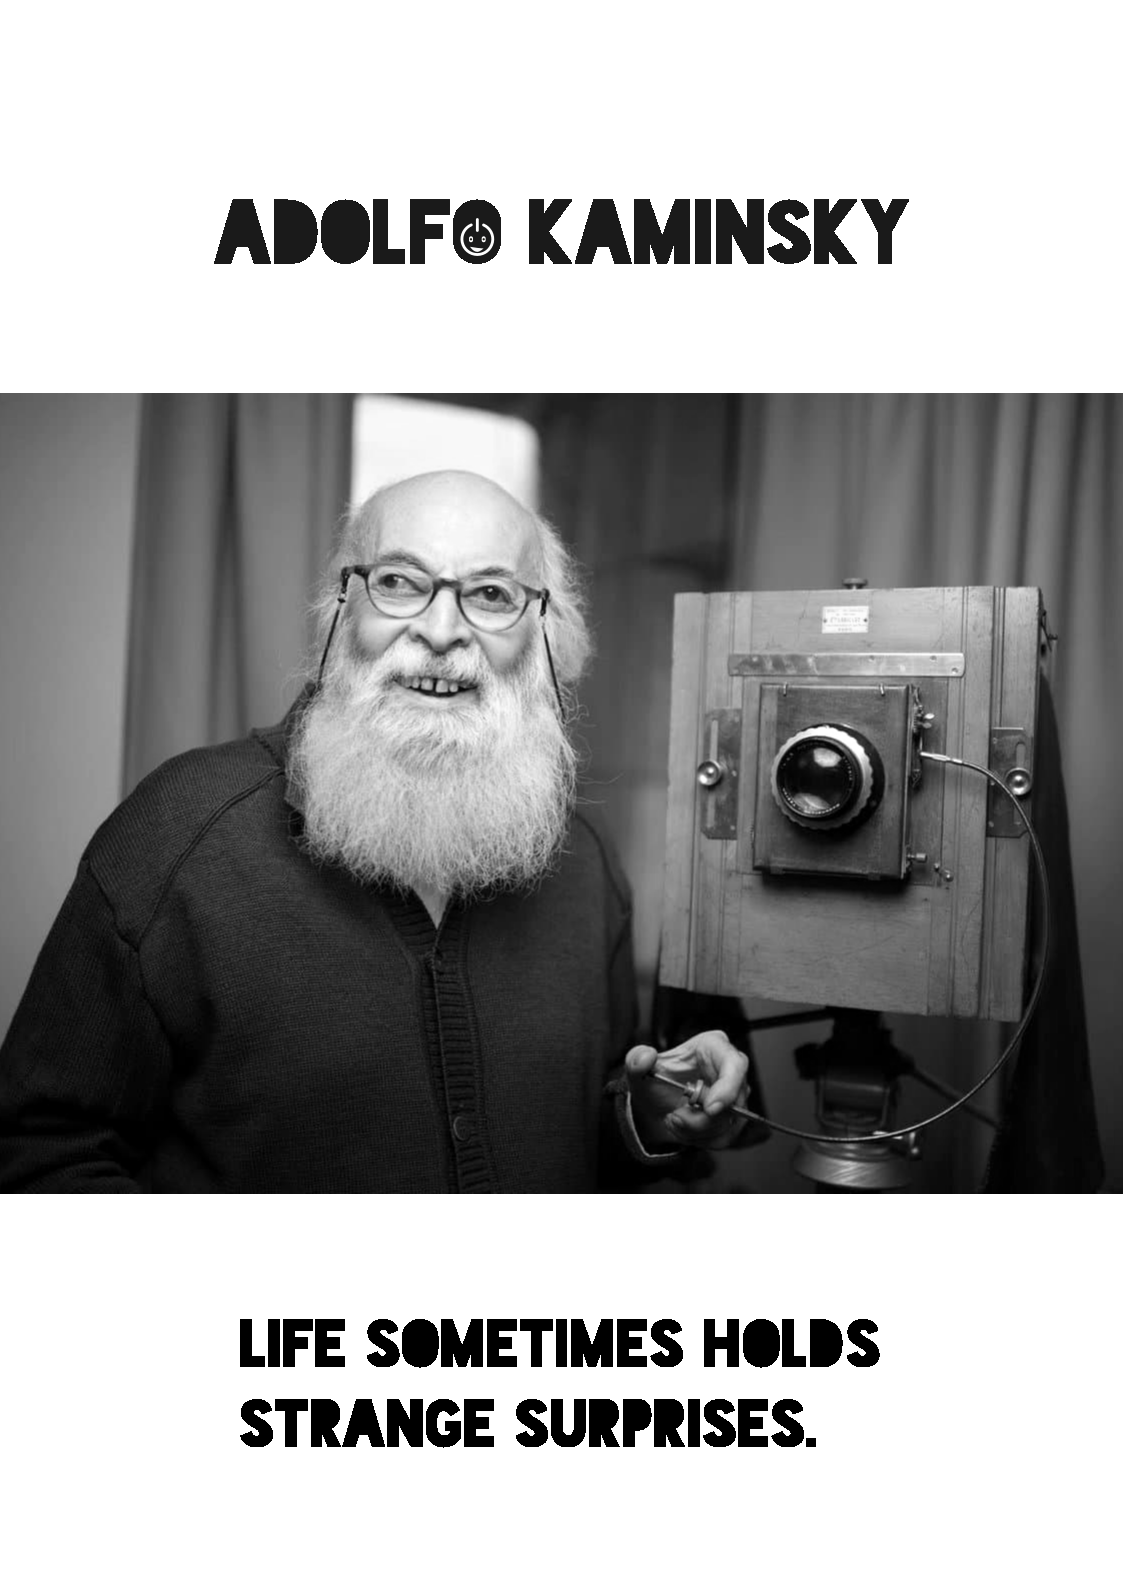 This is an OFFDEM black&white poster, showing a self-portrait by photographer and forger extraordinaire Adolfo Kaminsky, with a quote from him: "Life sometimes holds strange surprises".